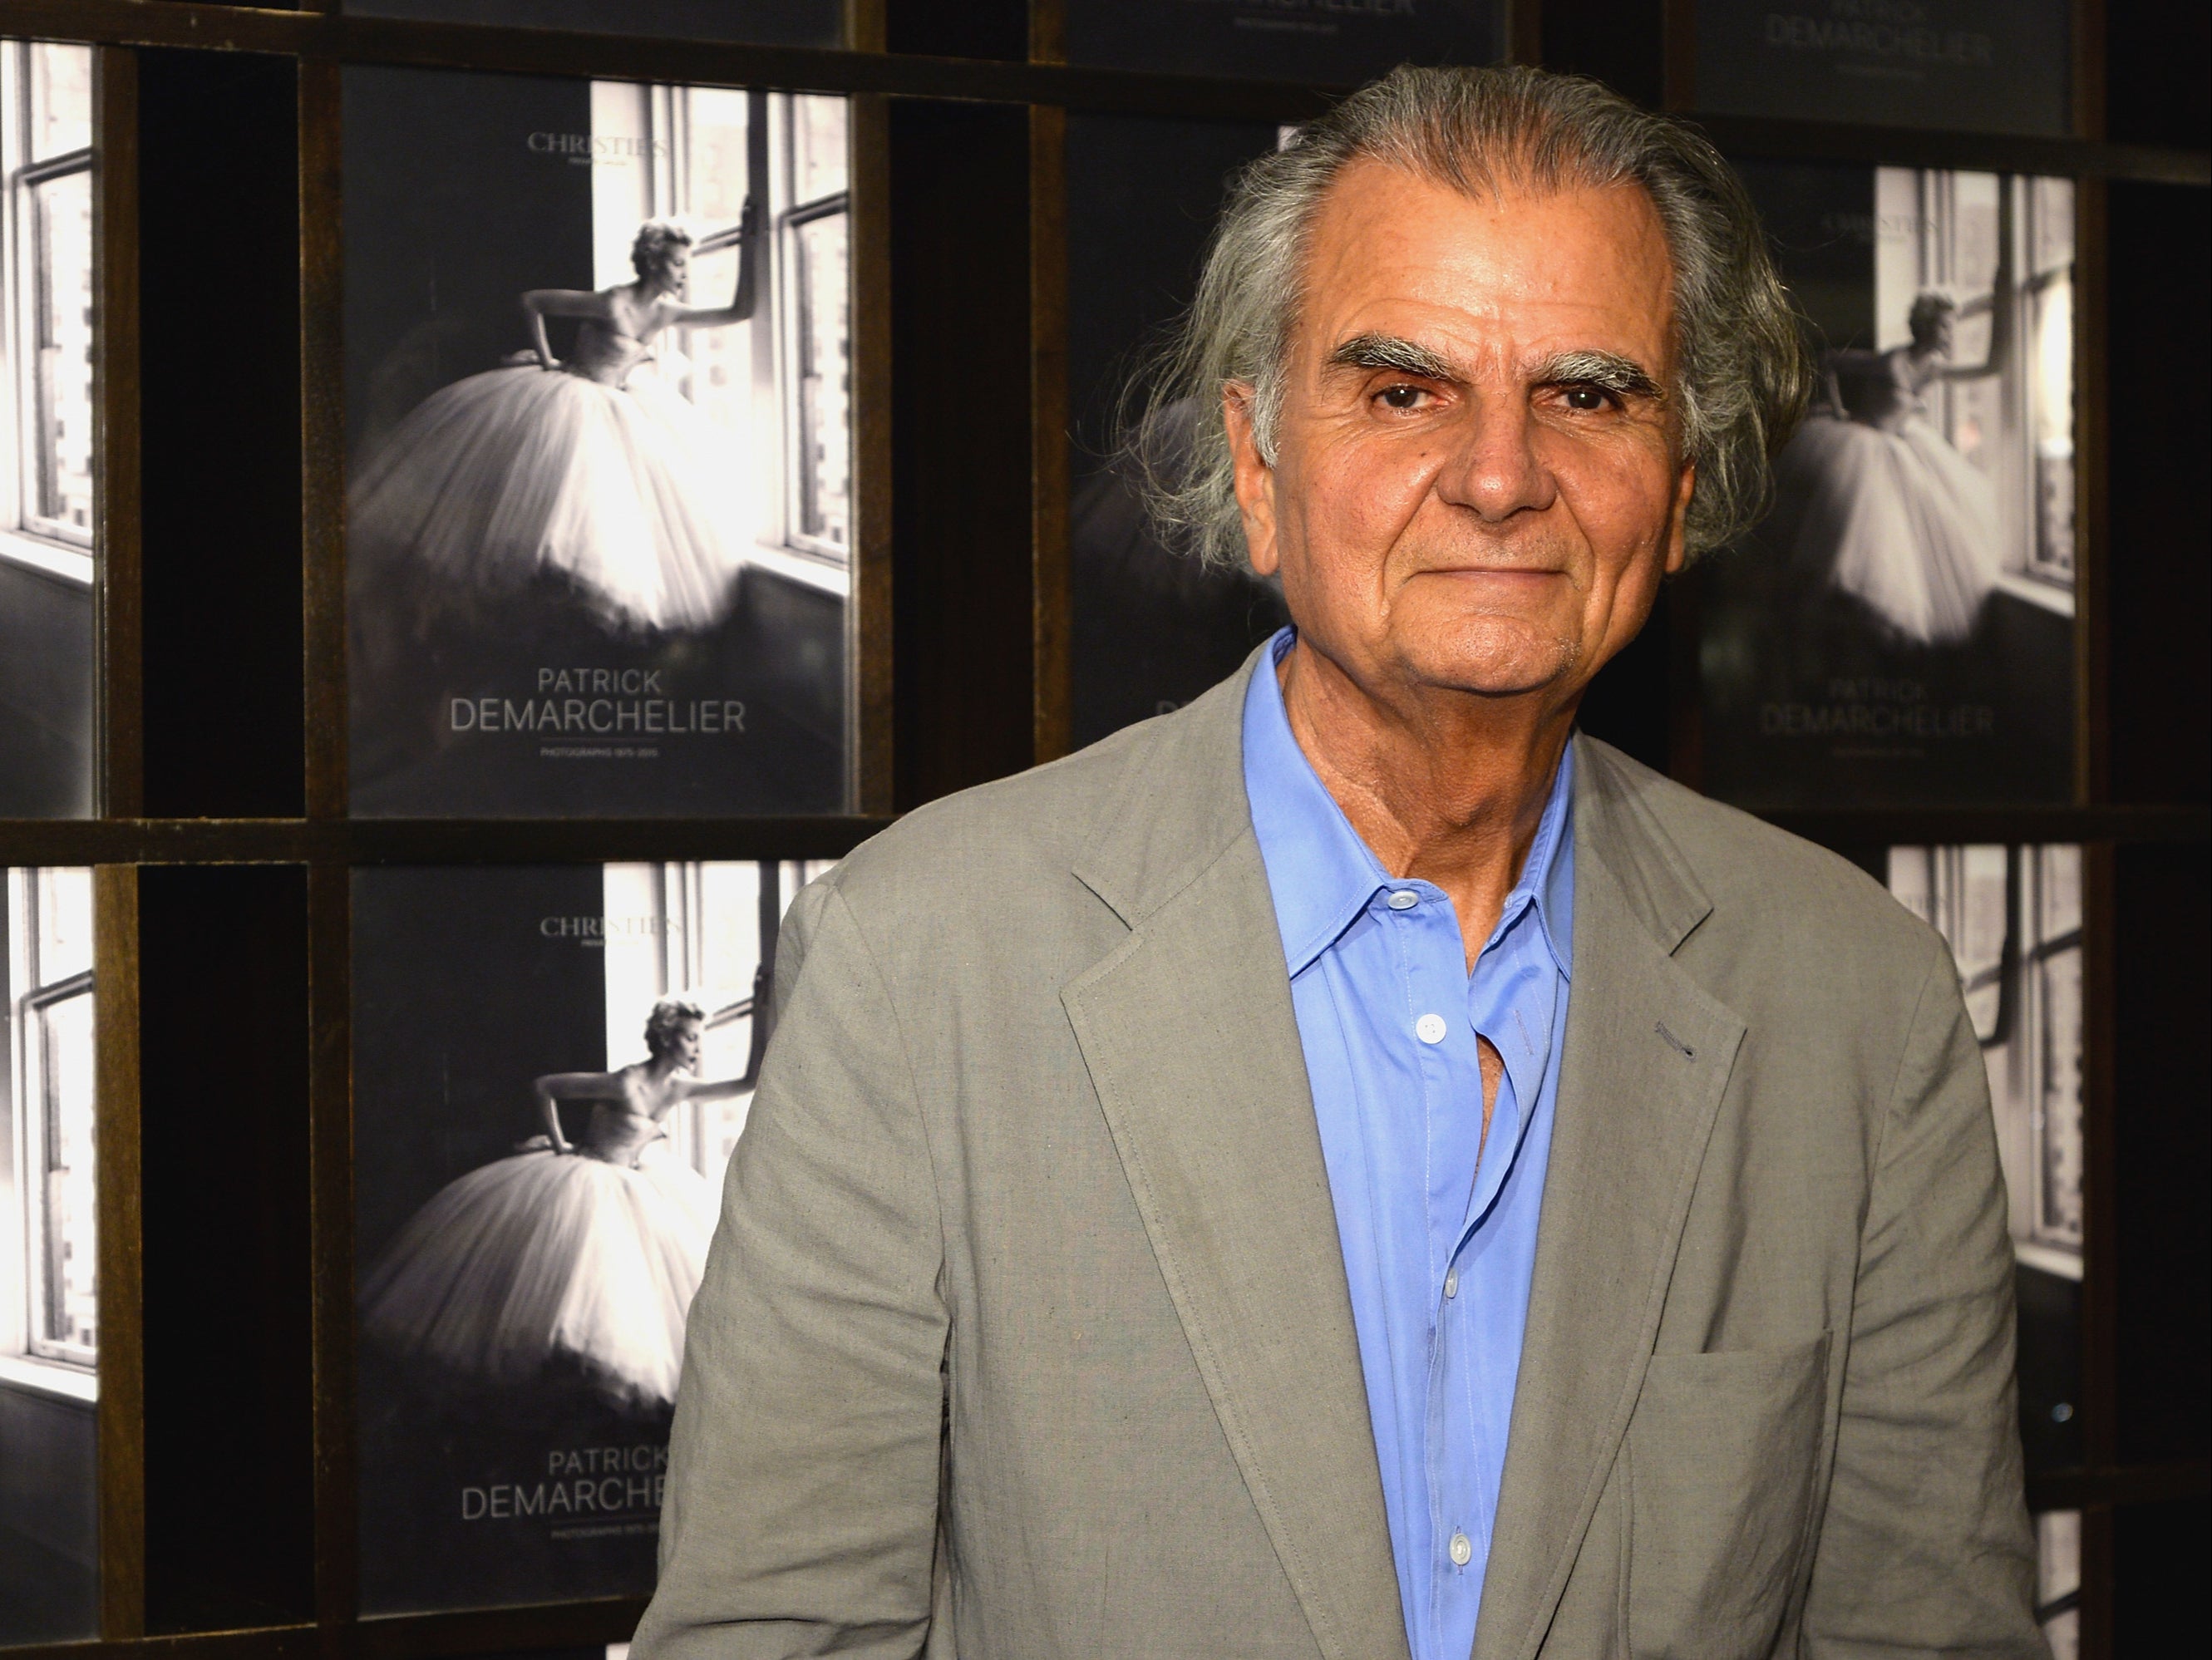 Photographer Patrick Demarchelier attends the "Patrick Demarchelier" special exhibition preview to celebrate NYFW: The Shows for Spring 2016